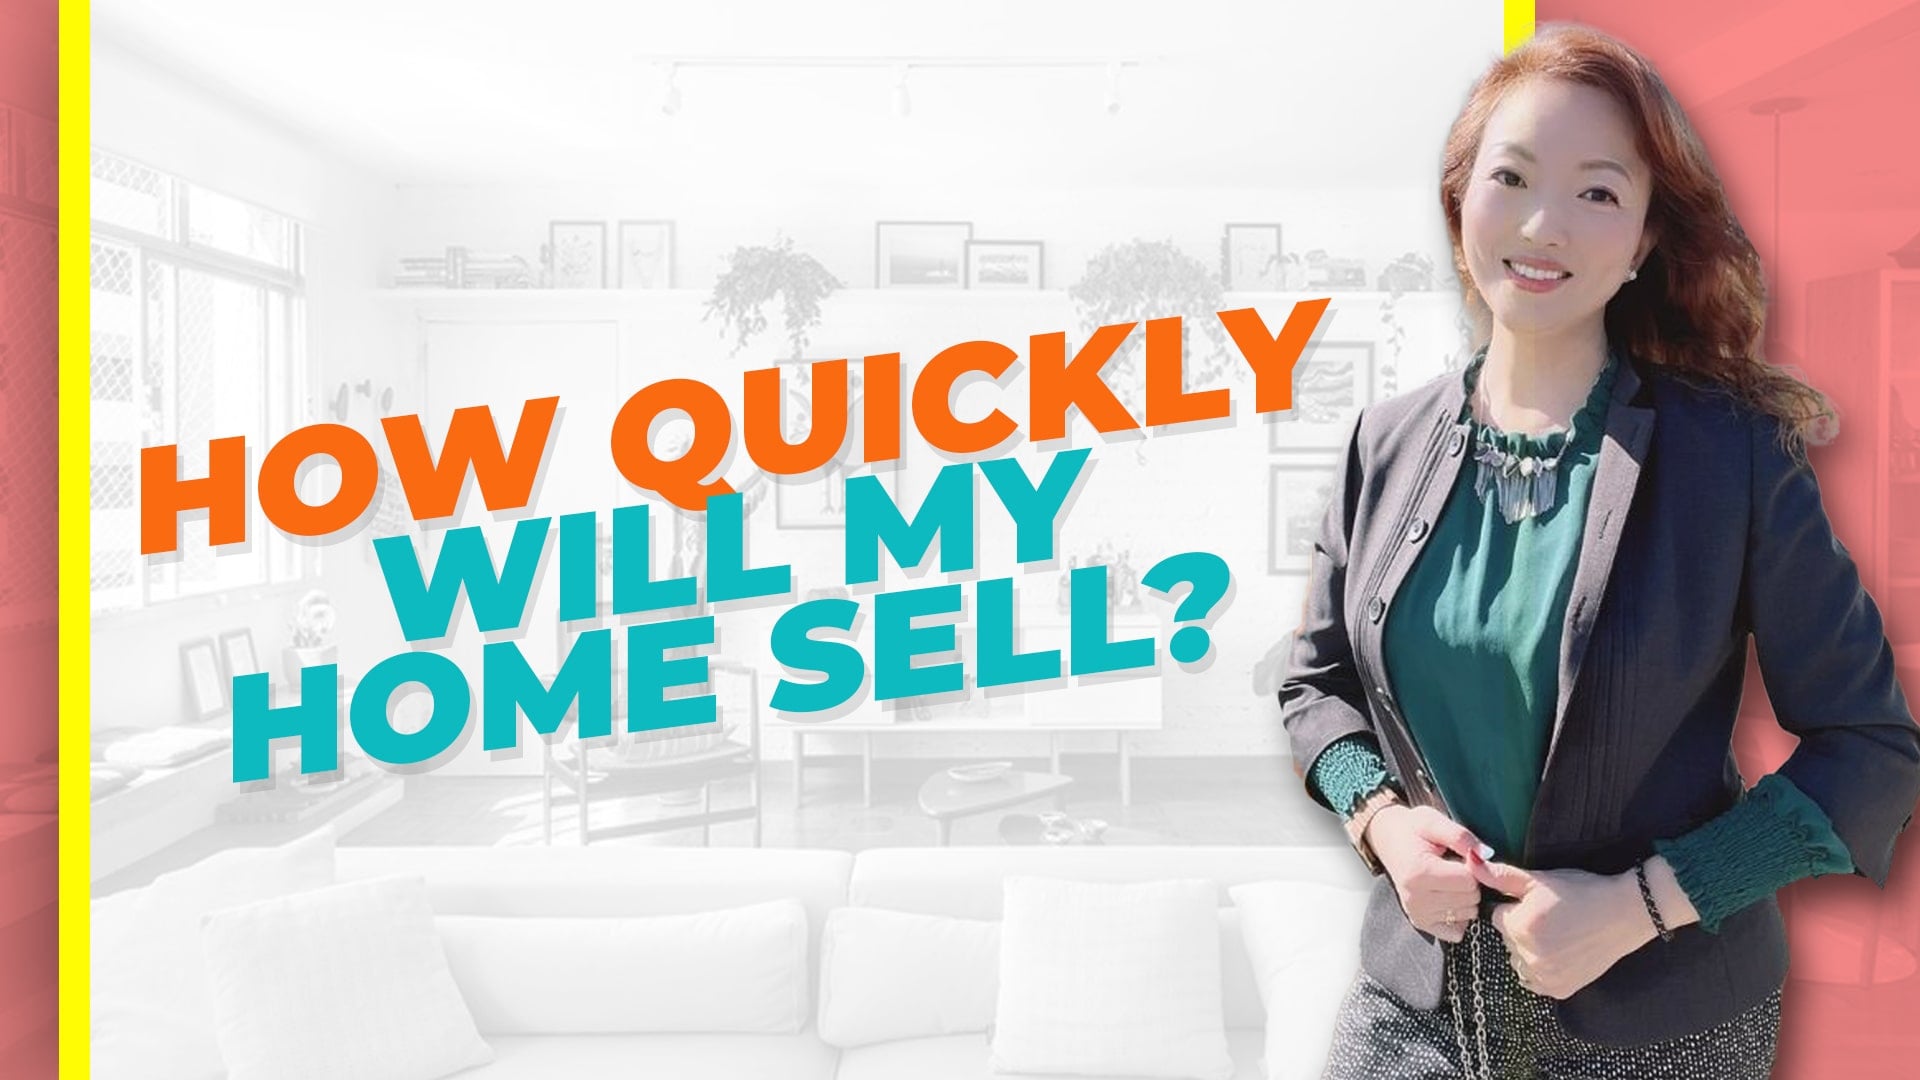 How Quickly Will My Home Sell